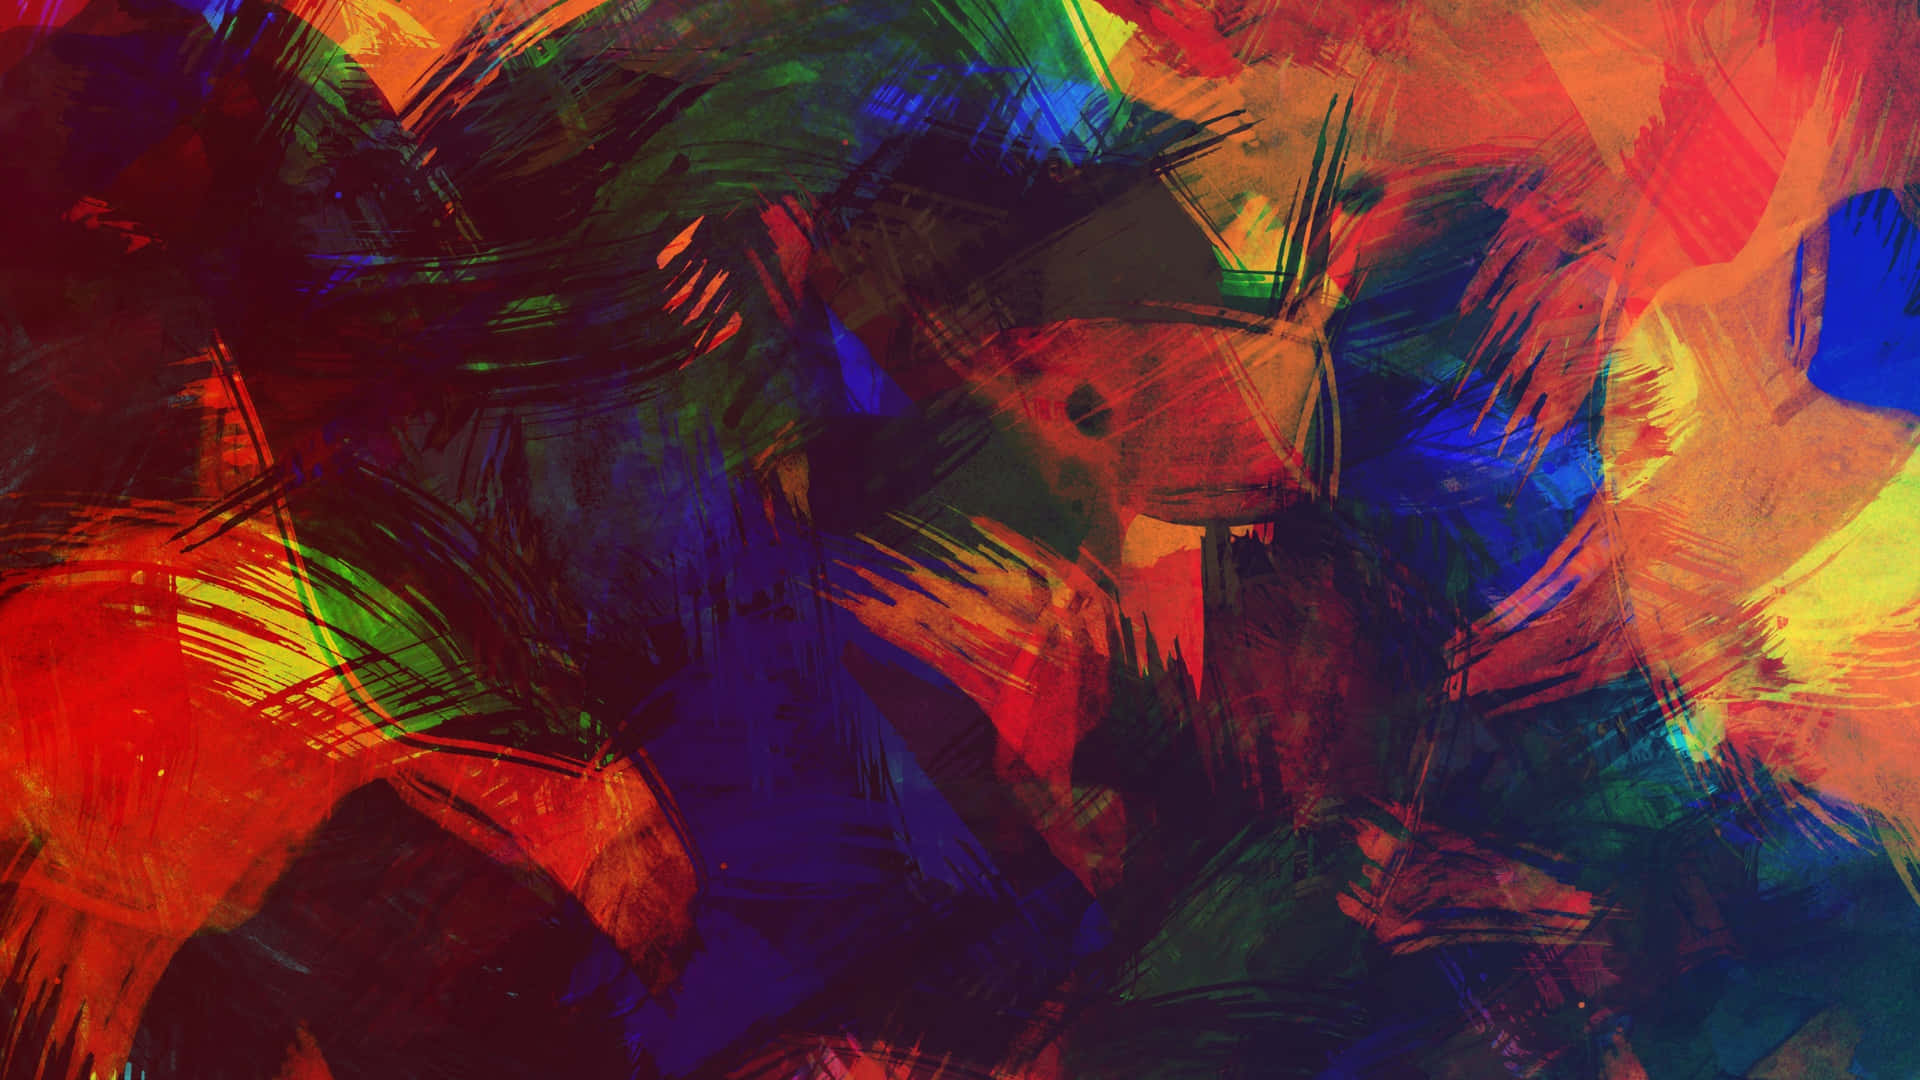 Abstract Color Explosion Artwork Wallpaper